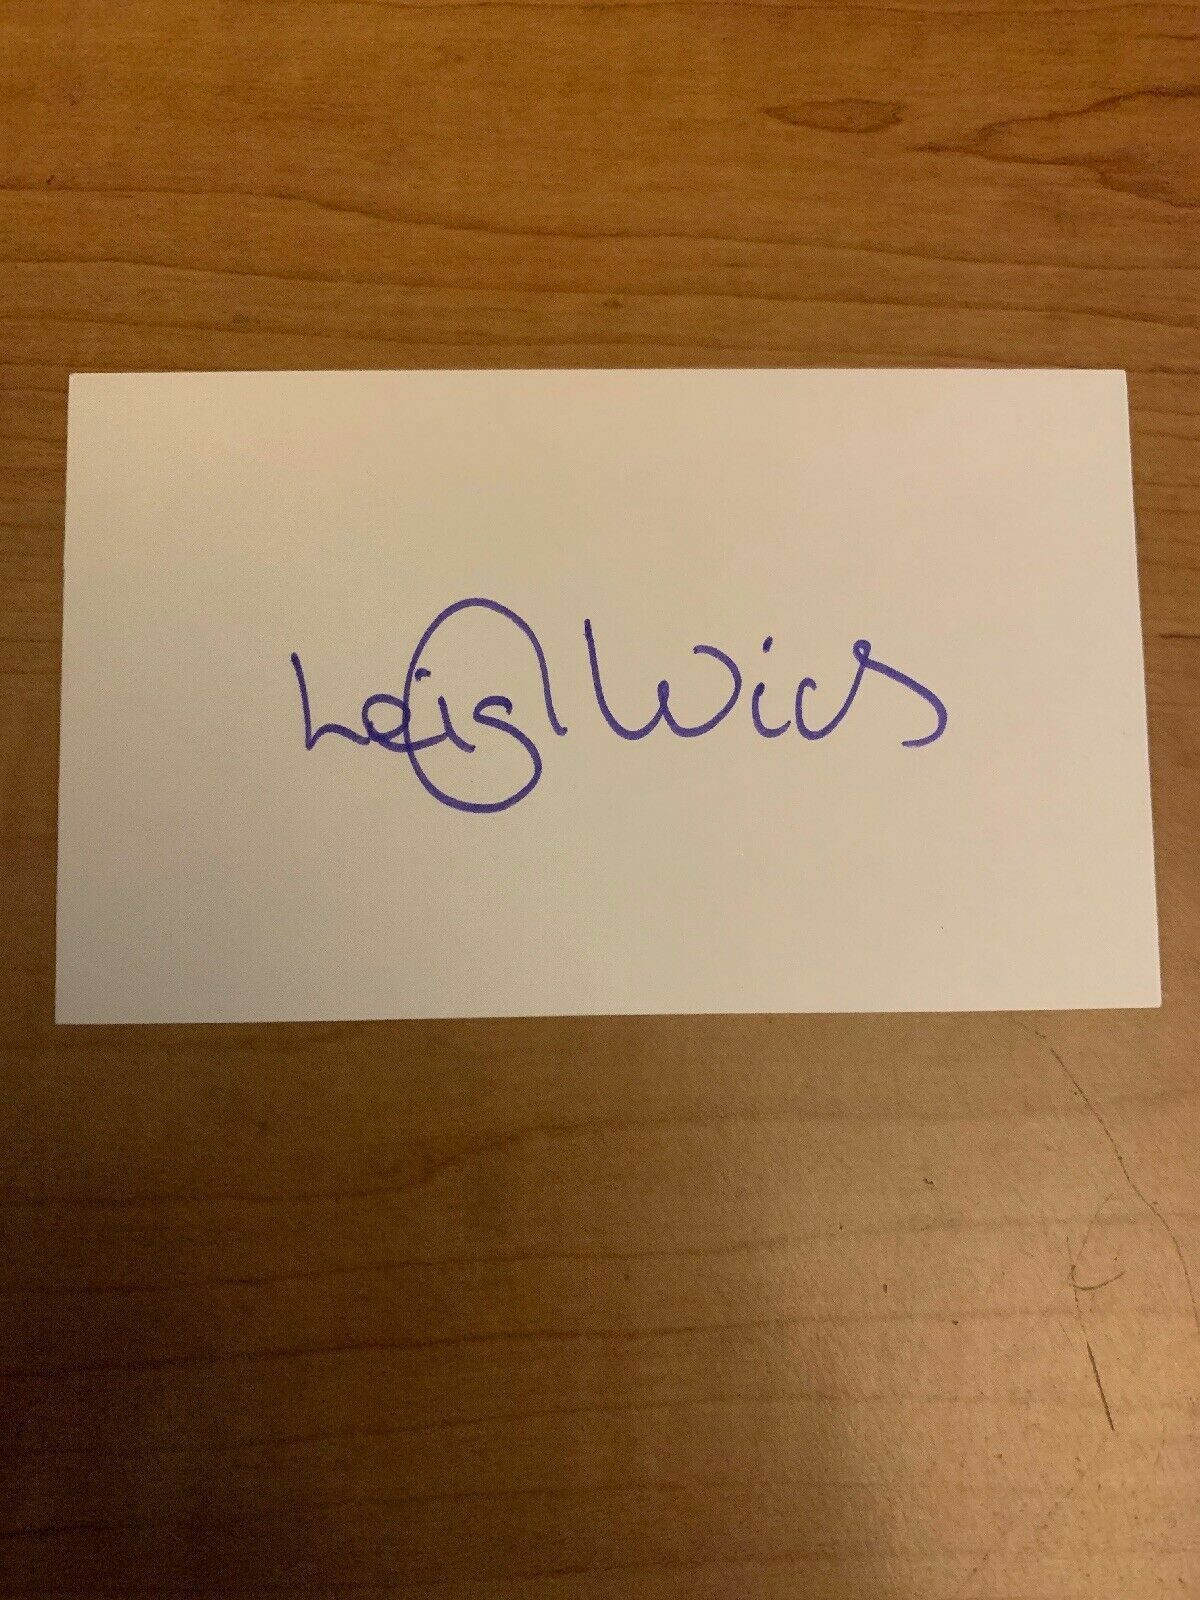 LEIGH WICKS - BOXER - AUTHENTIC AUTOGRAPH SIGNED- B5168